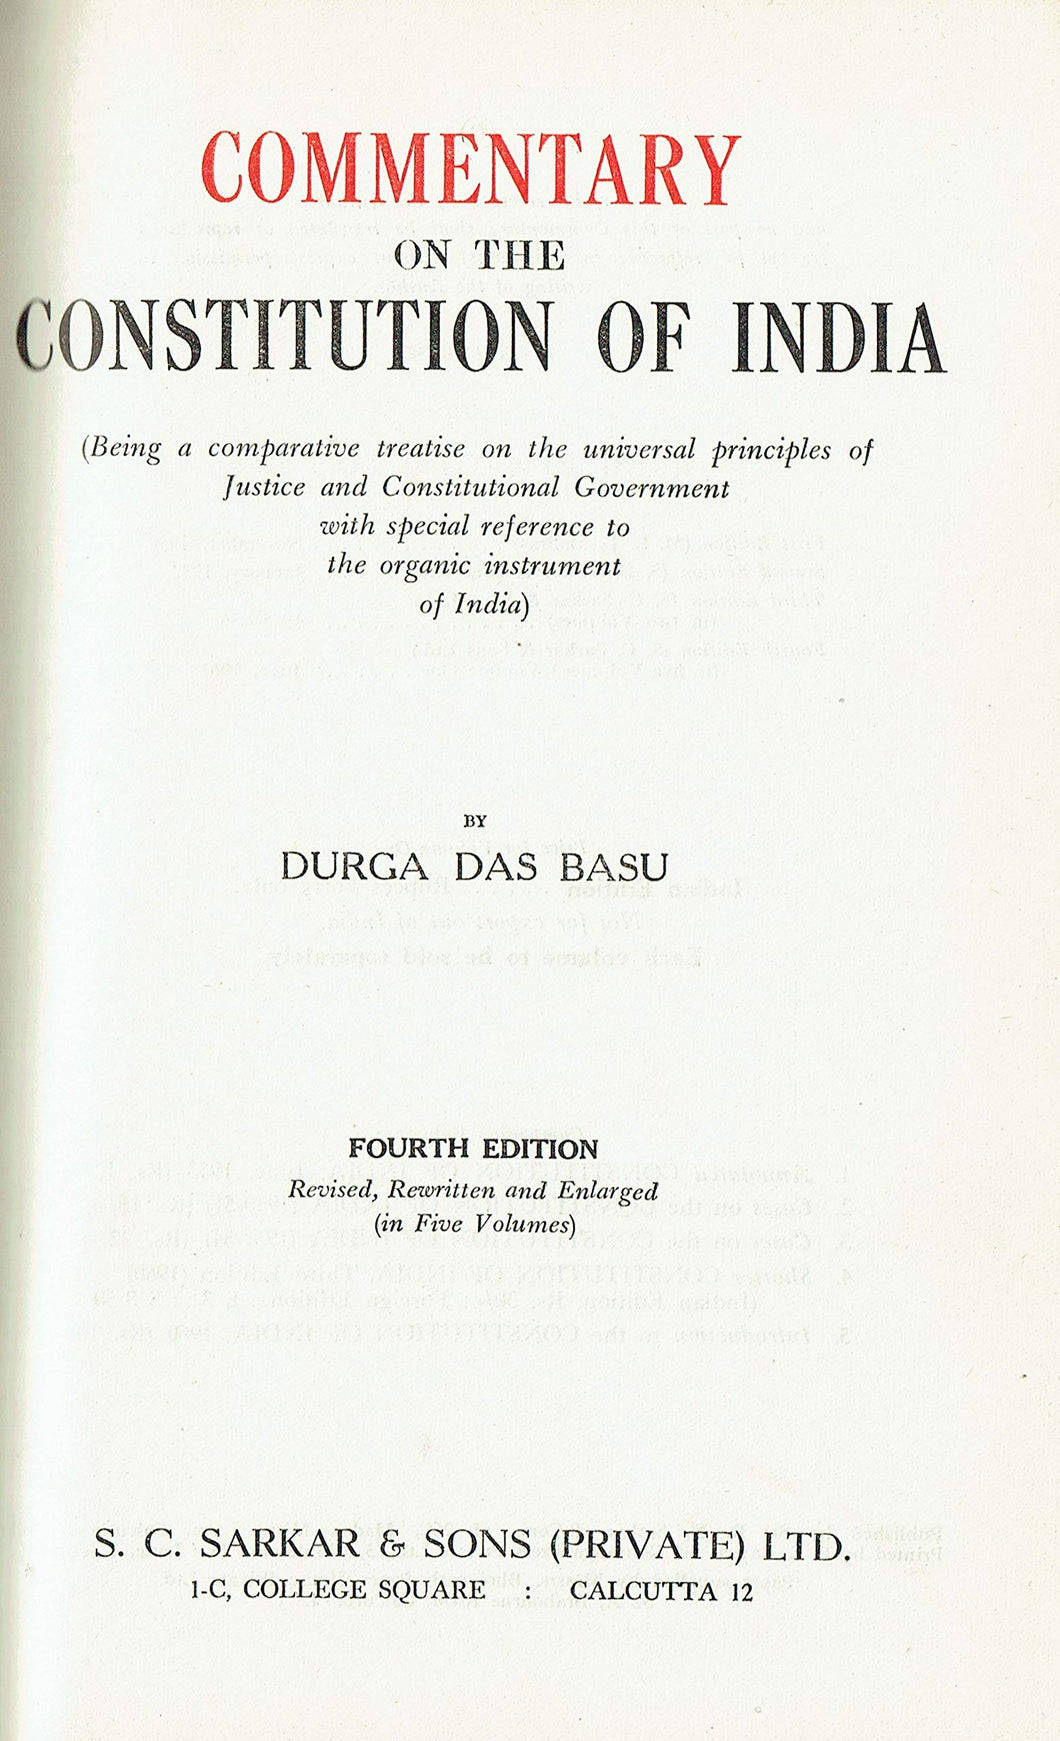 Basu's Commentary on the Constitution of India - Fourth Edition, Volume One, 1961